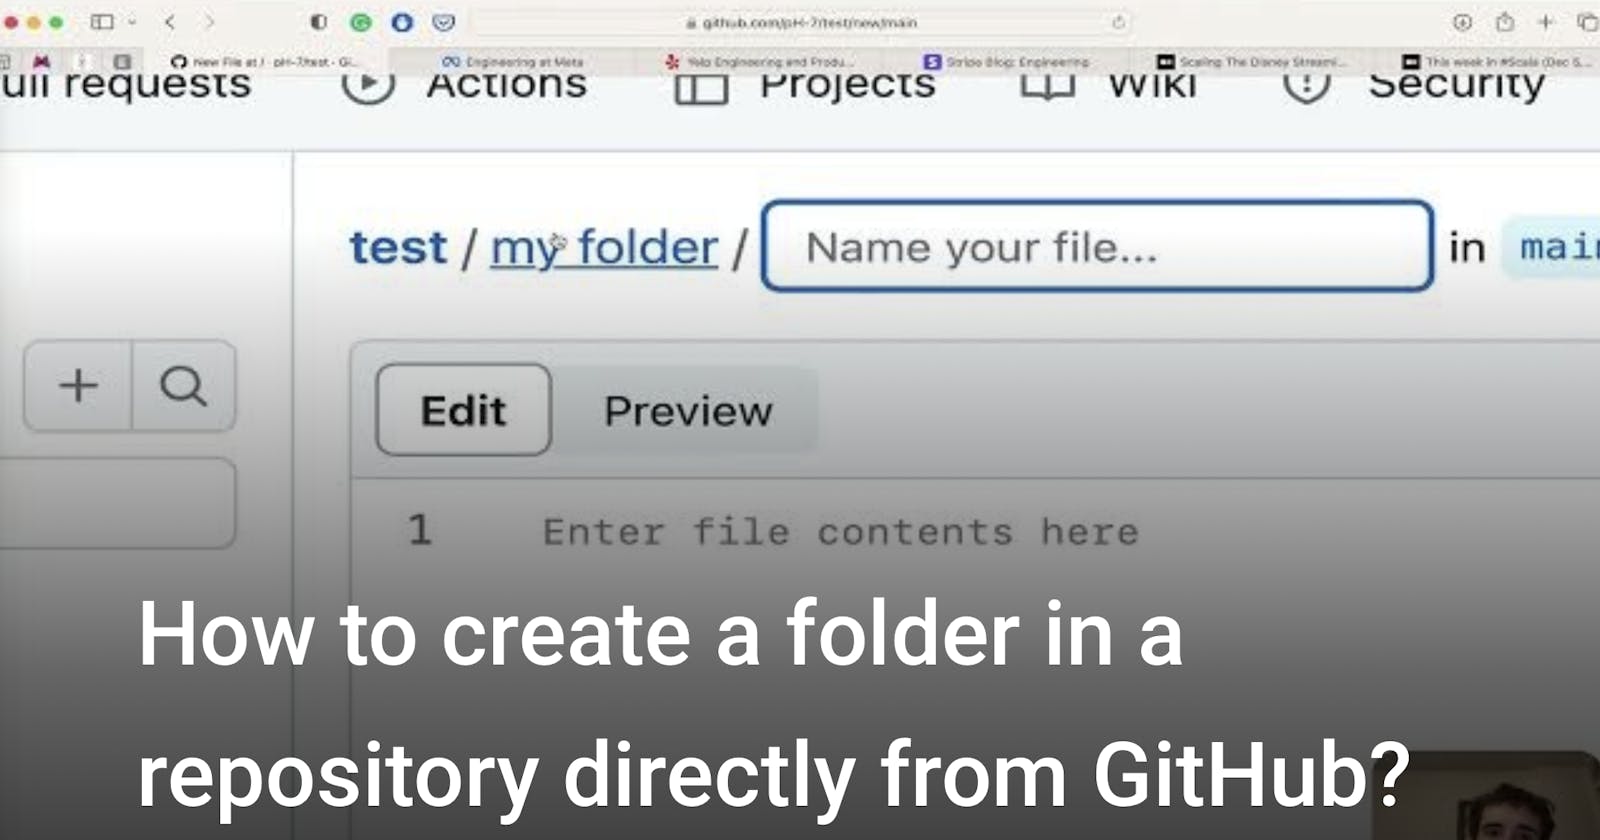 How to create a folder in a repository directly from GitHub?